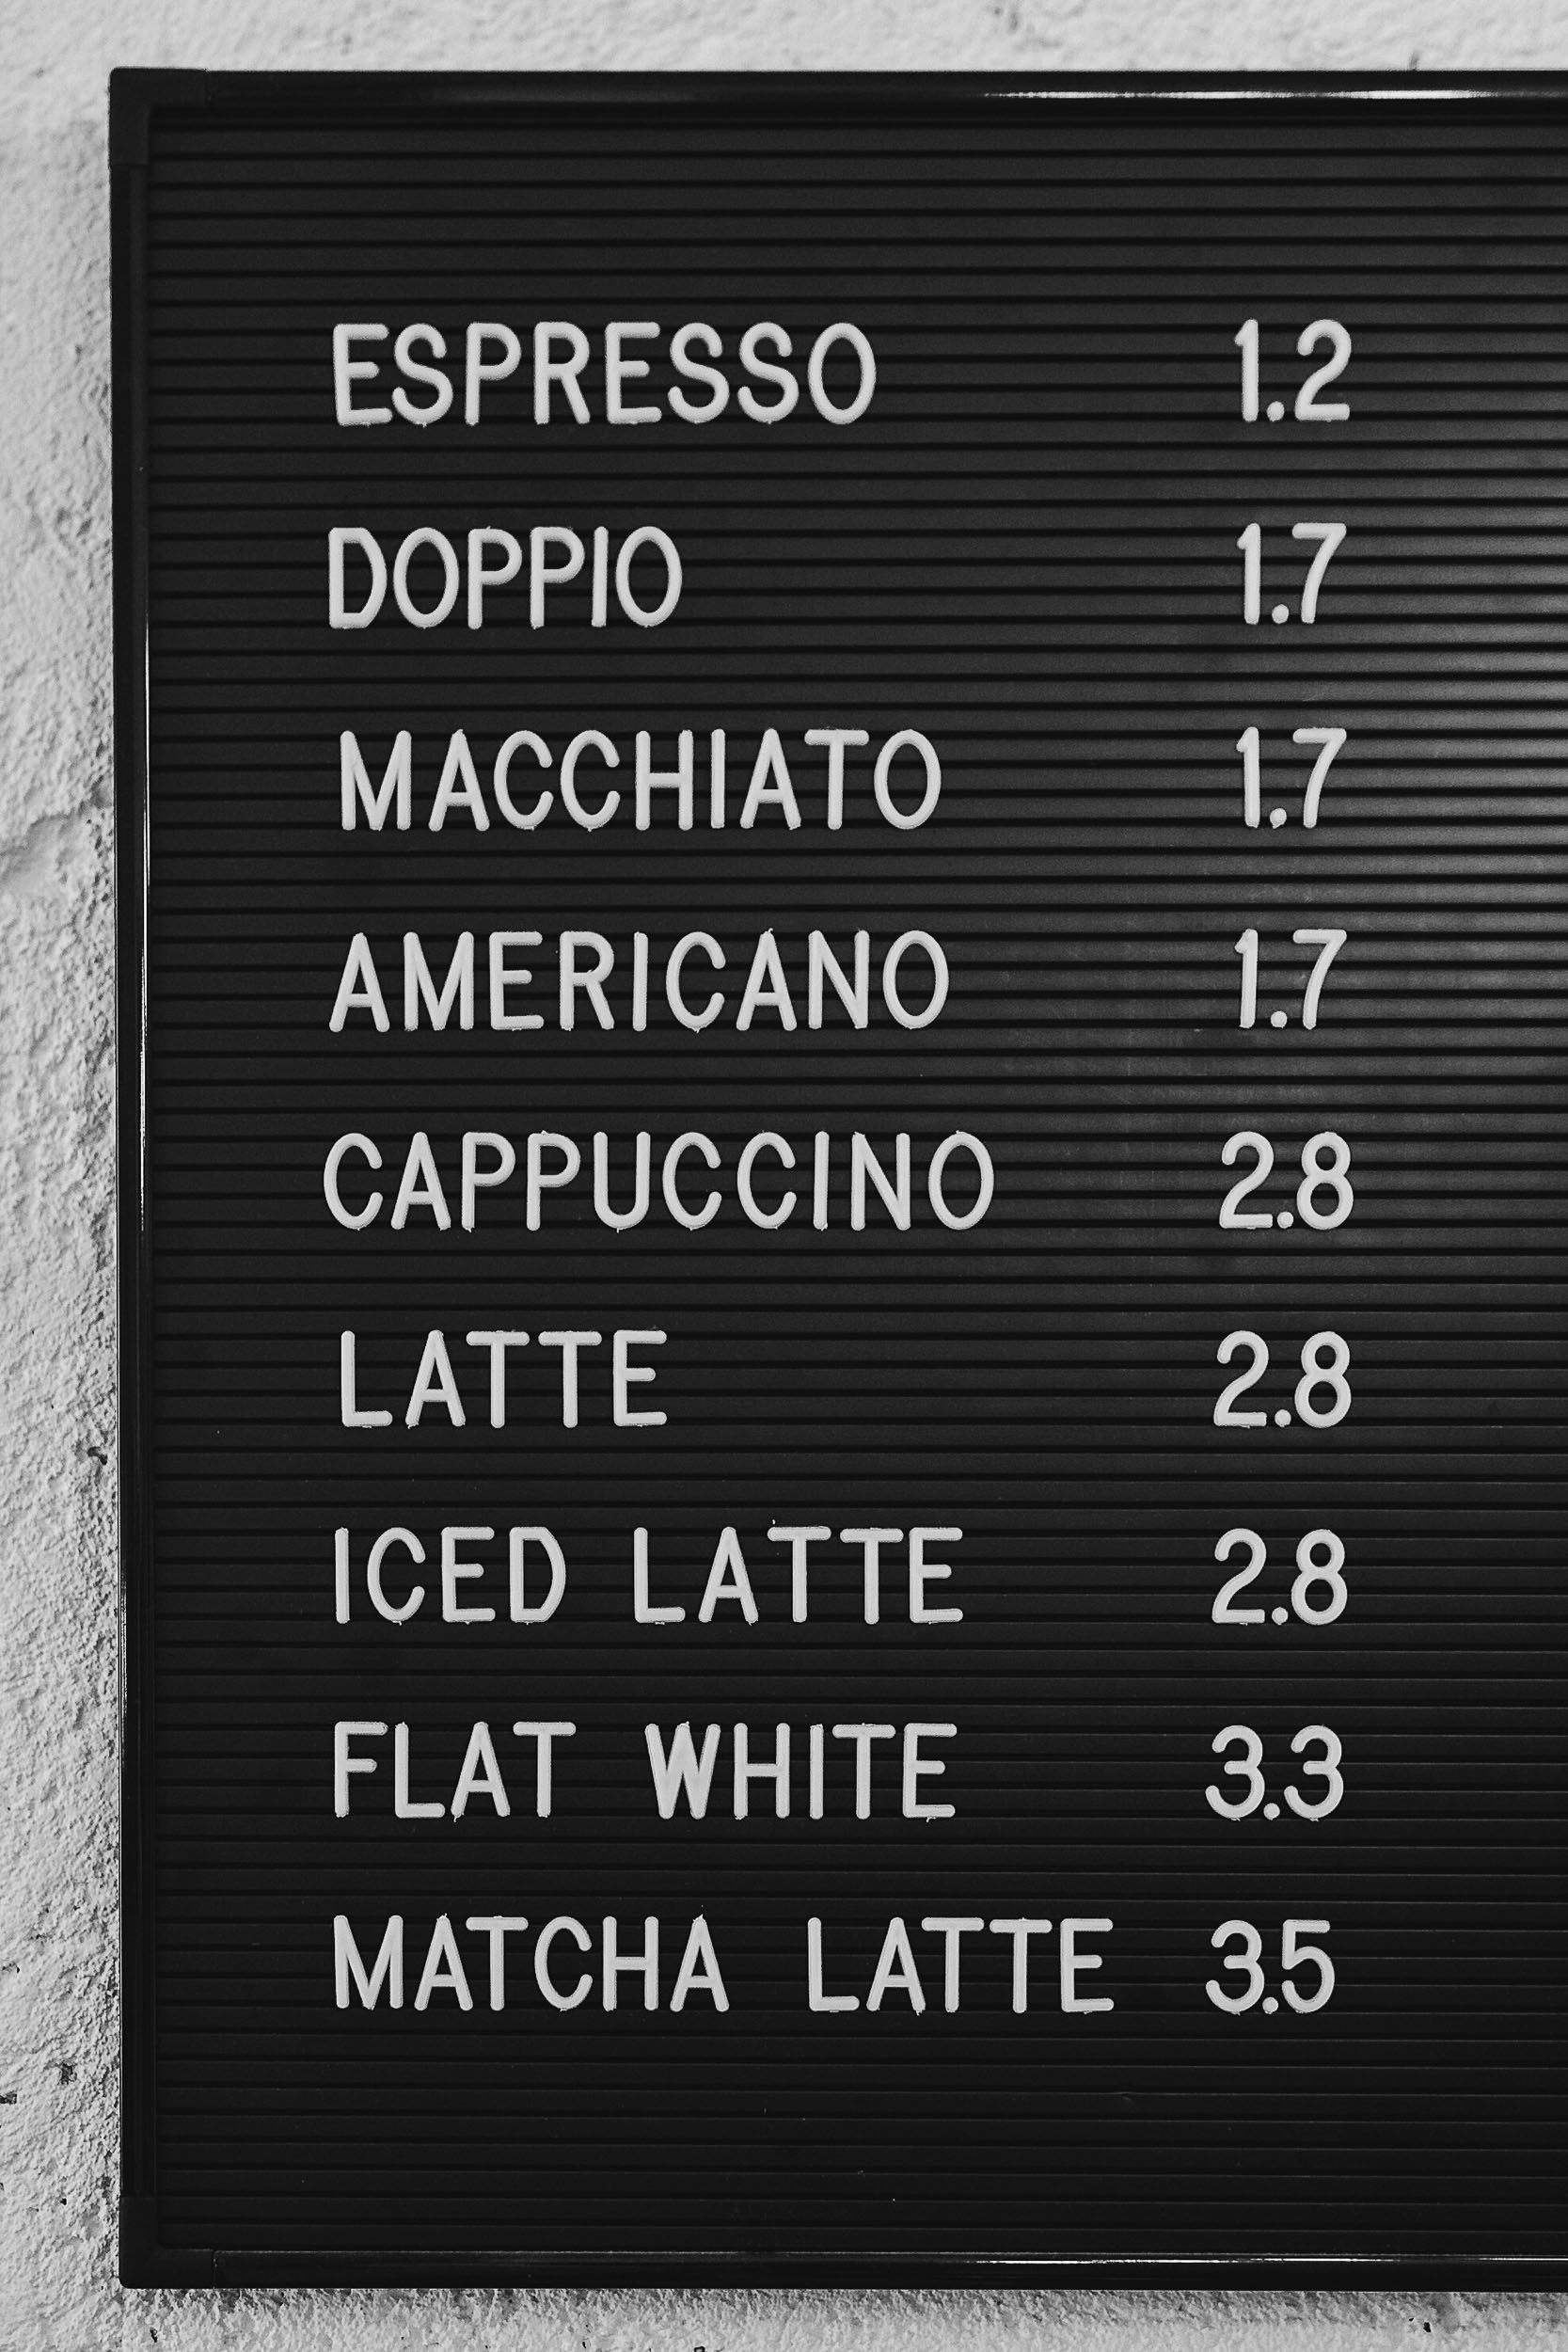 The coffee lineup at Hello, Kristof in Lisbon, Portugal